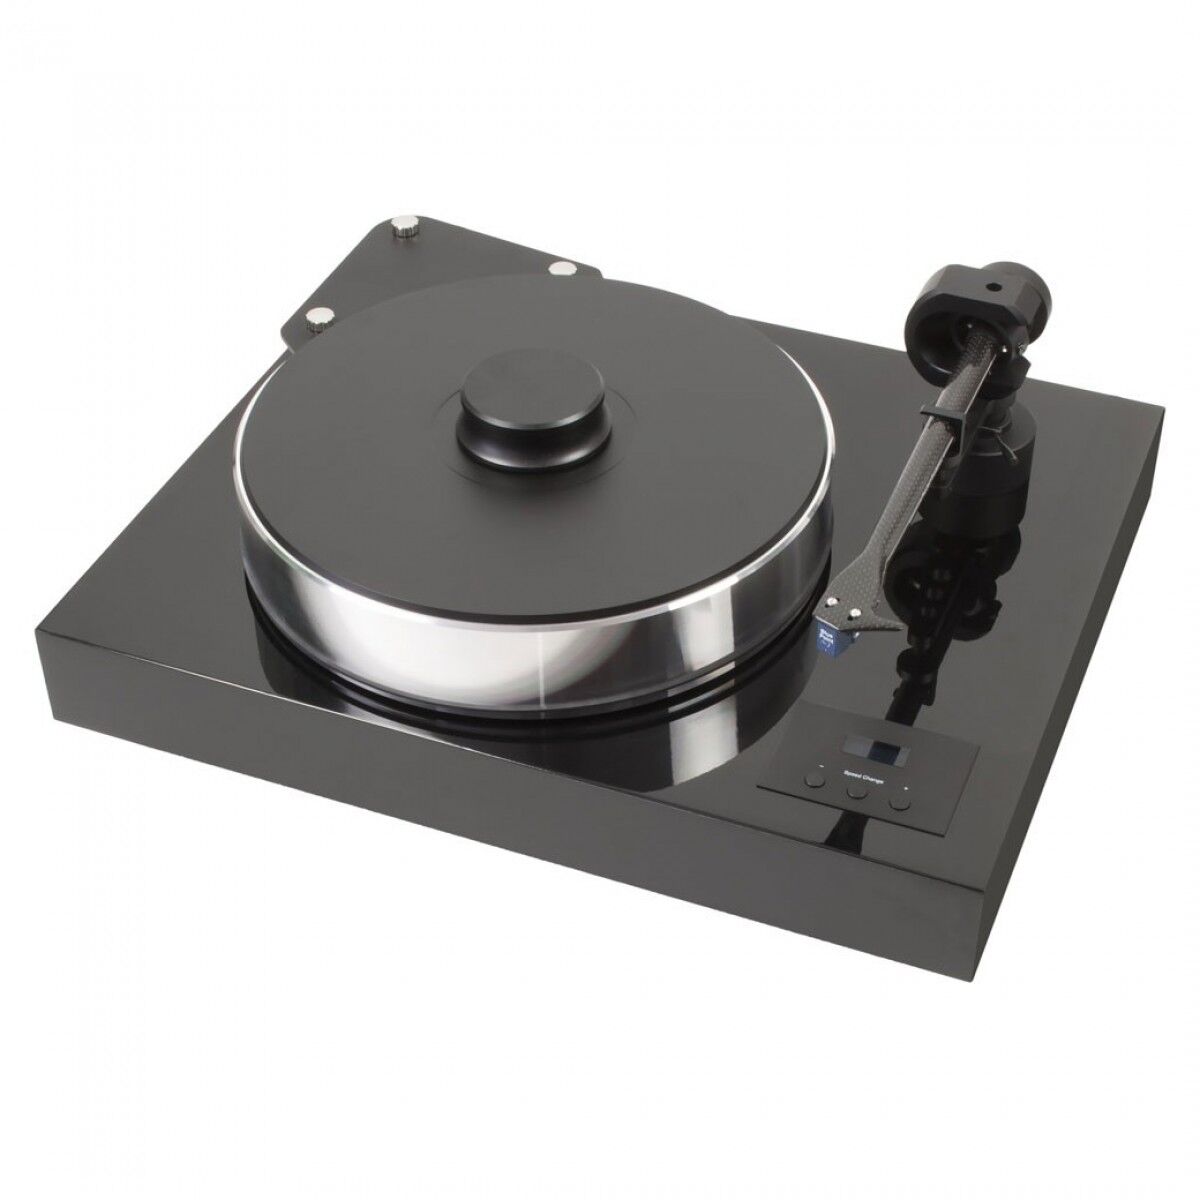 Pro-Ject Xtension 10 Black Turntable (No Cartridge)